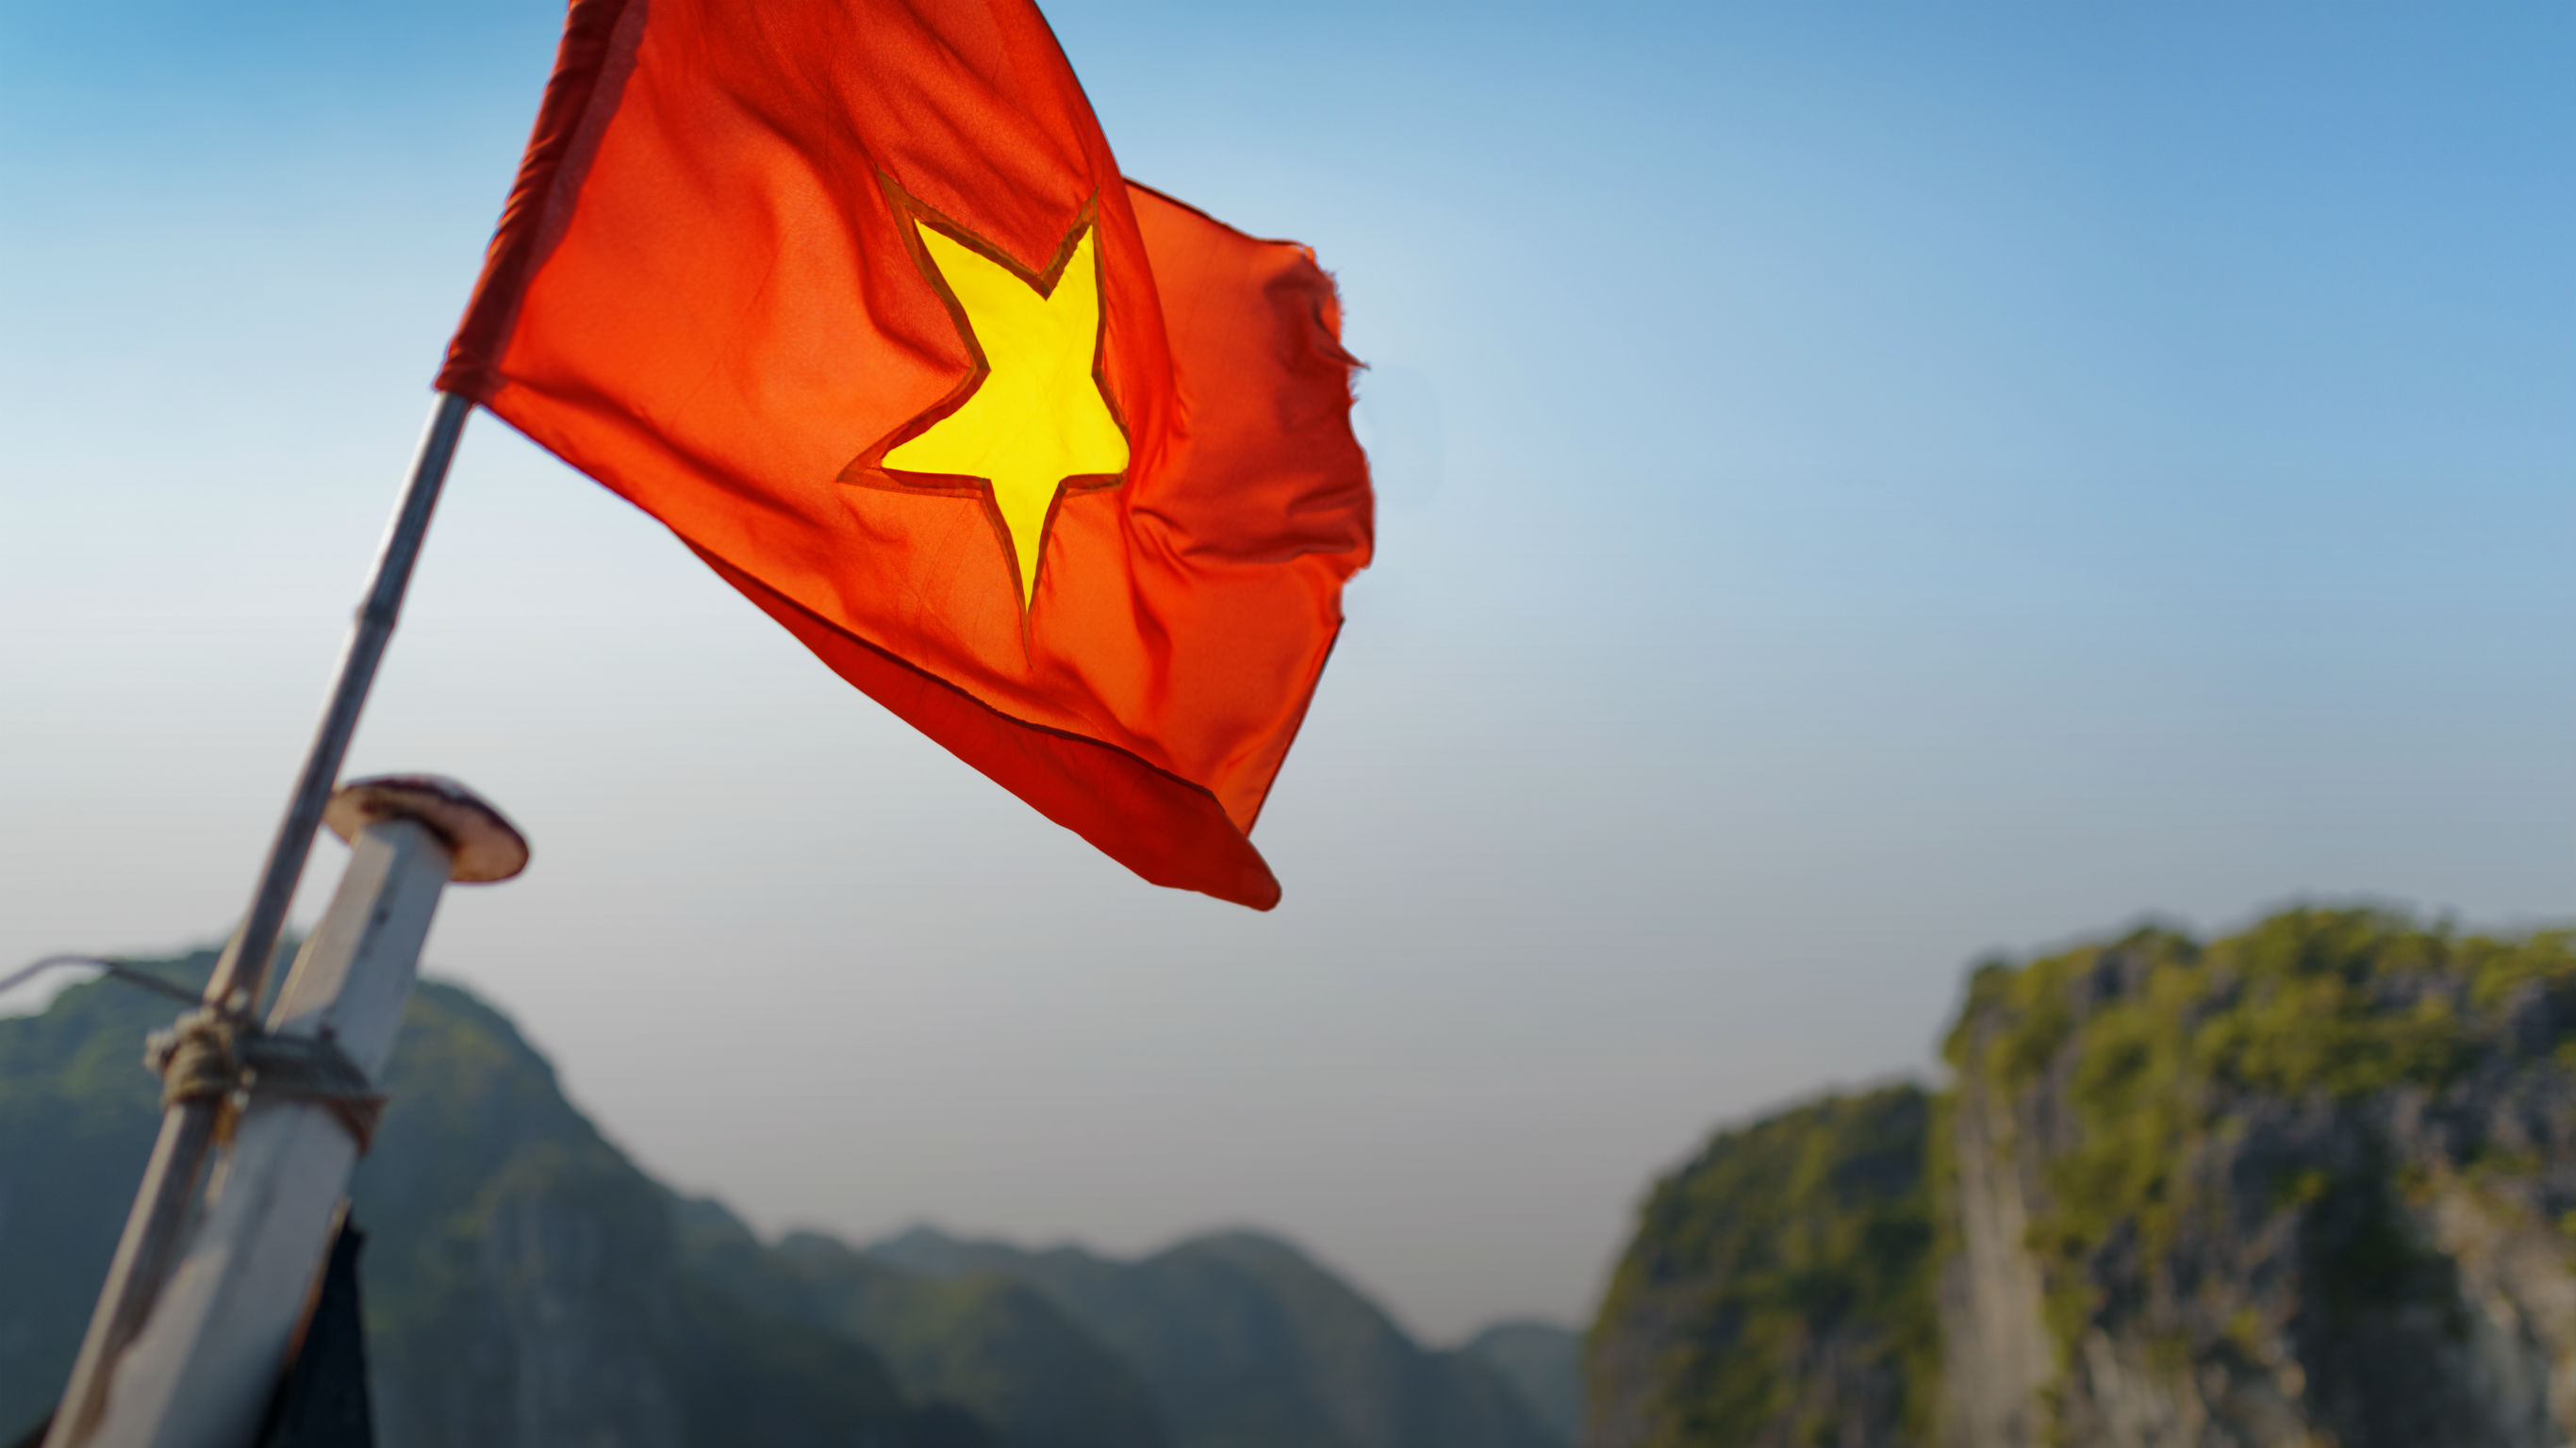 The flag of Vietnam fluttering on ship in the Halong Bay